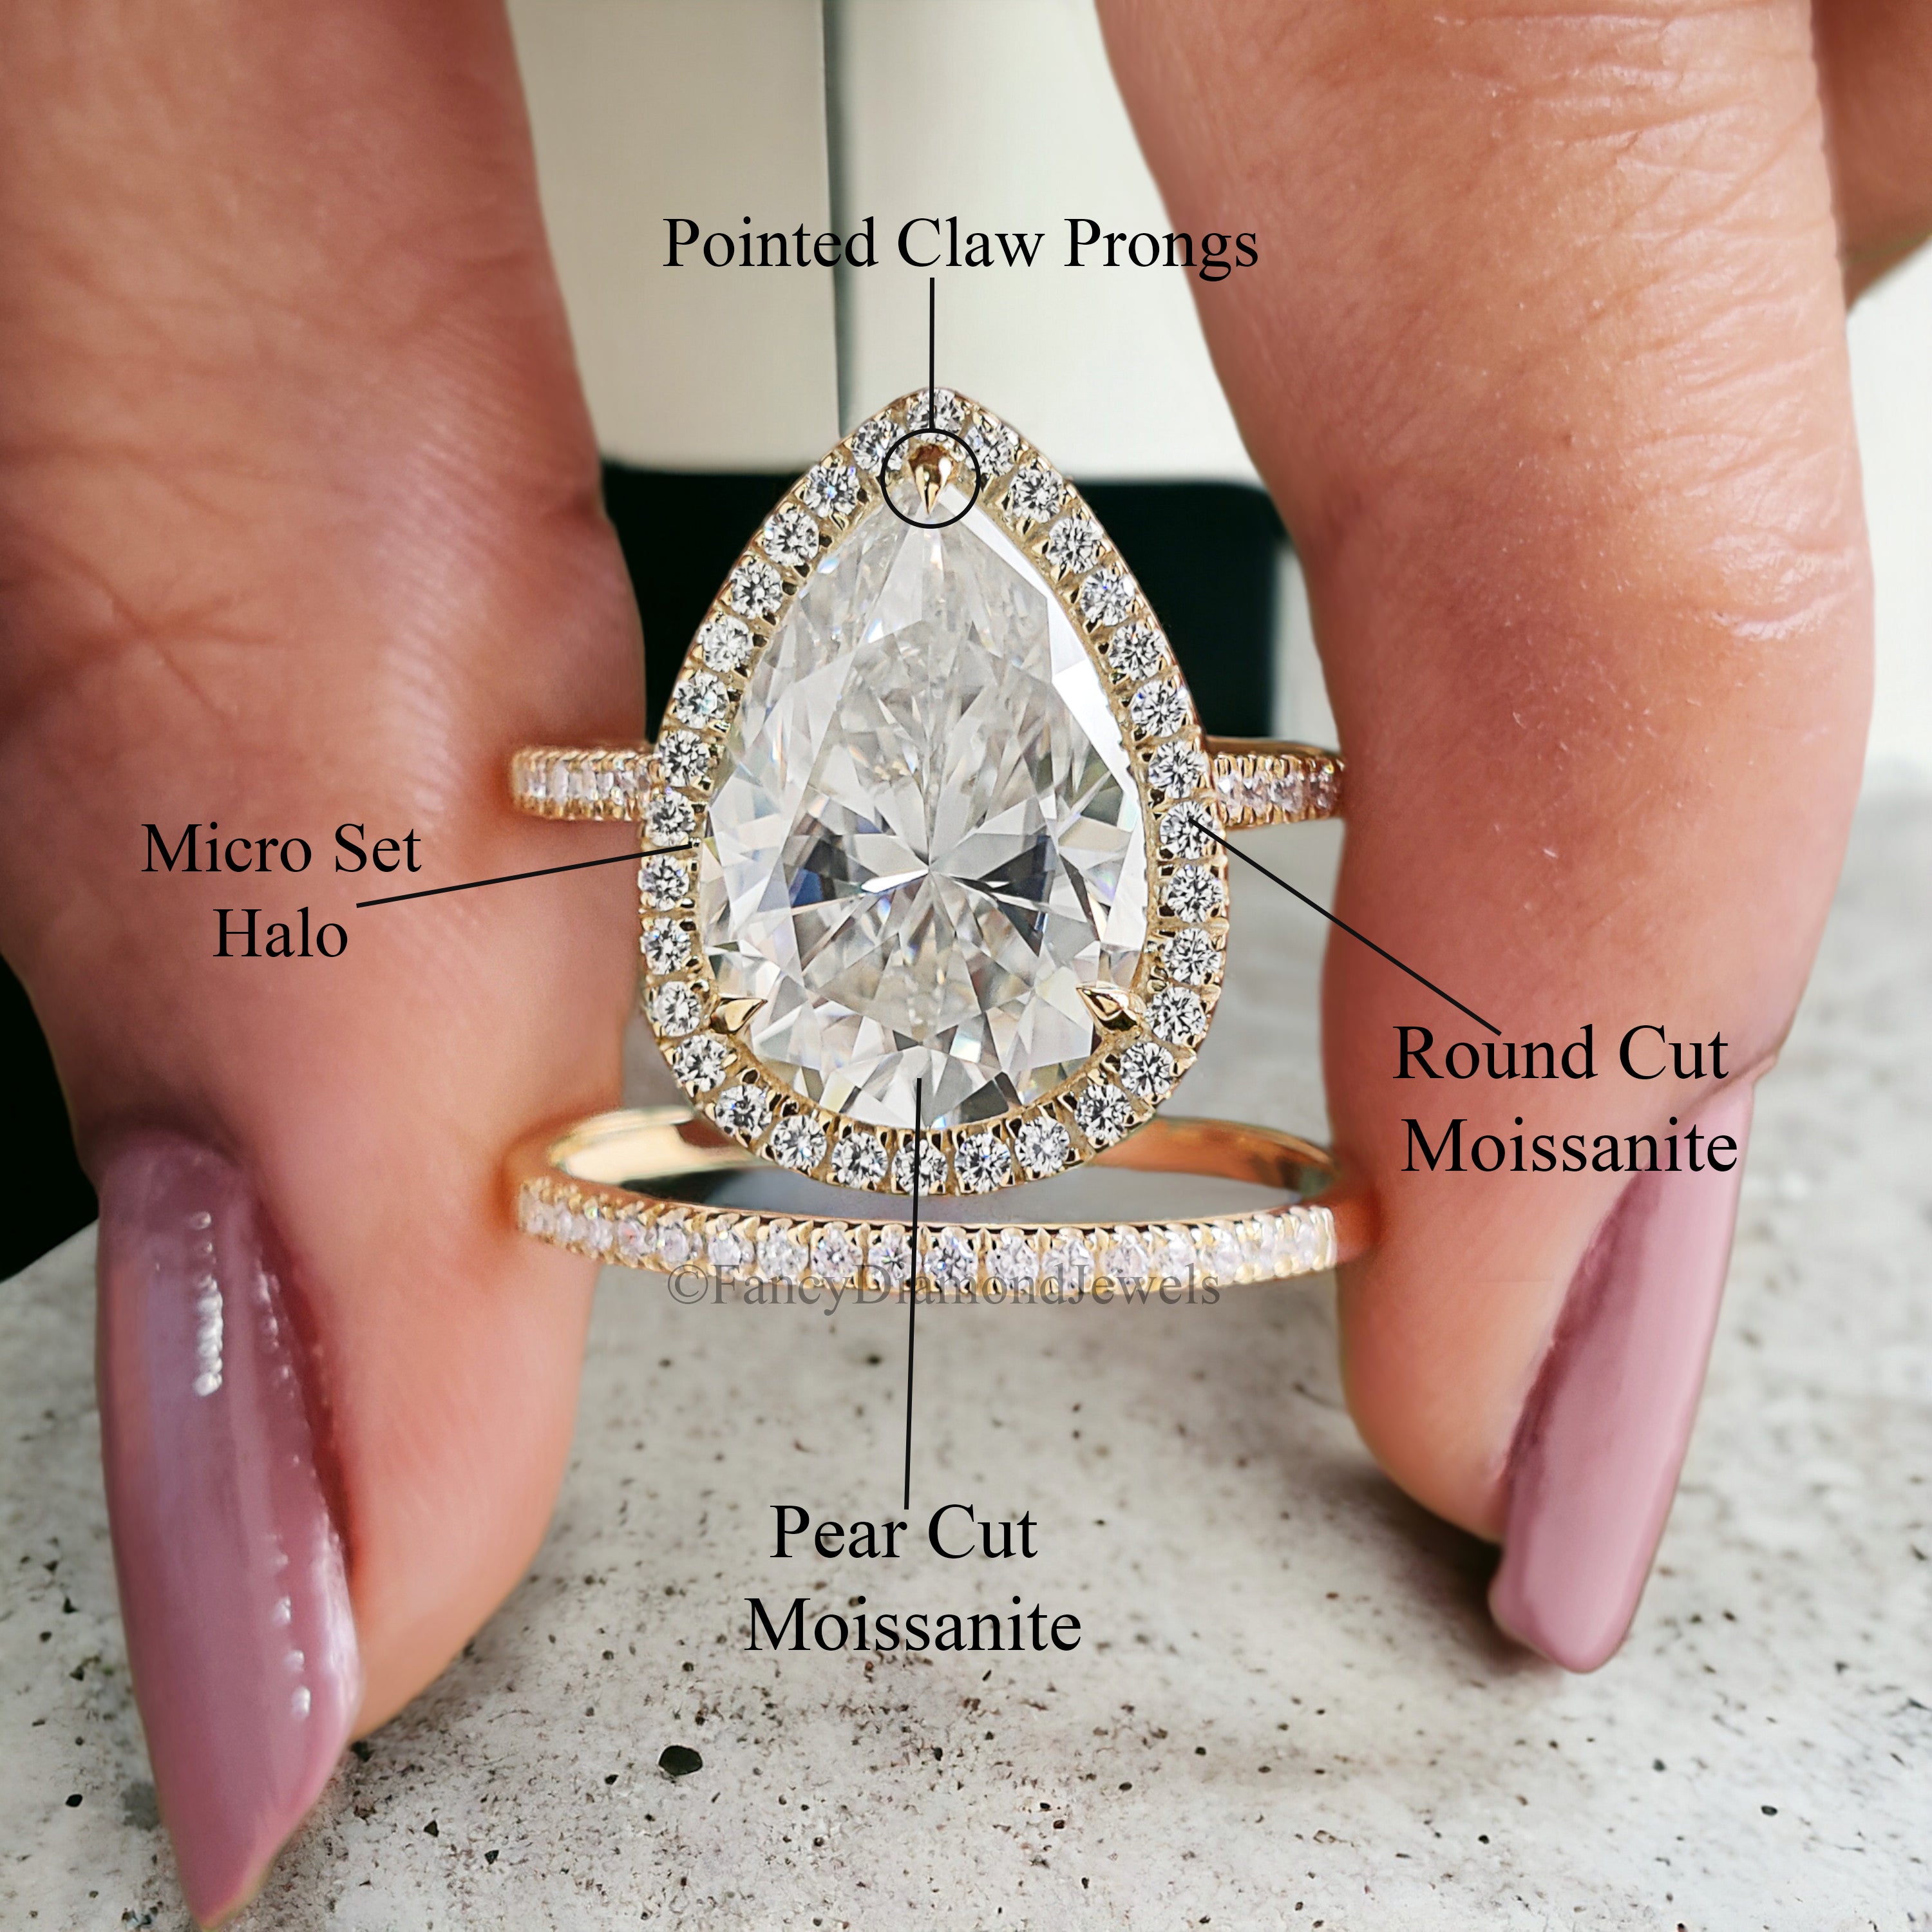 Pear Cut Moissanite Ring Colorless Moissanite Engagement Ring Matching Eternity Band Wedding Ring Set Halo Bridal Ring Set For Women FD183